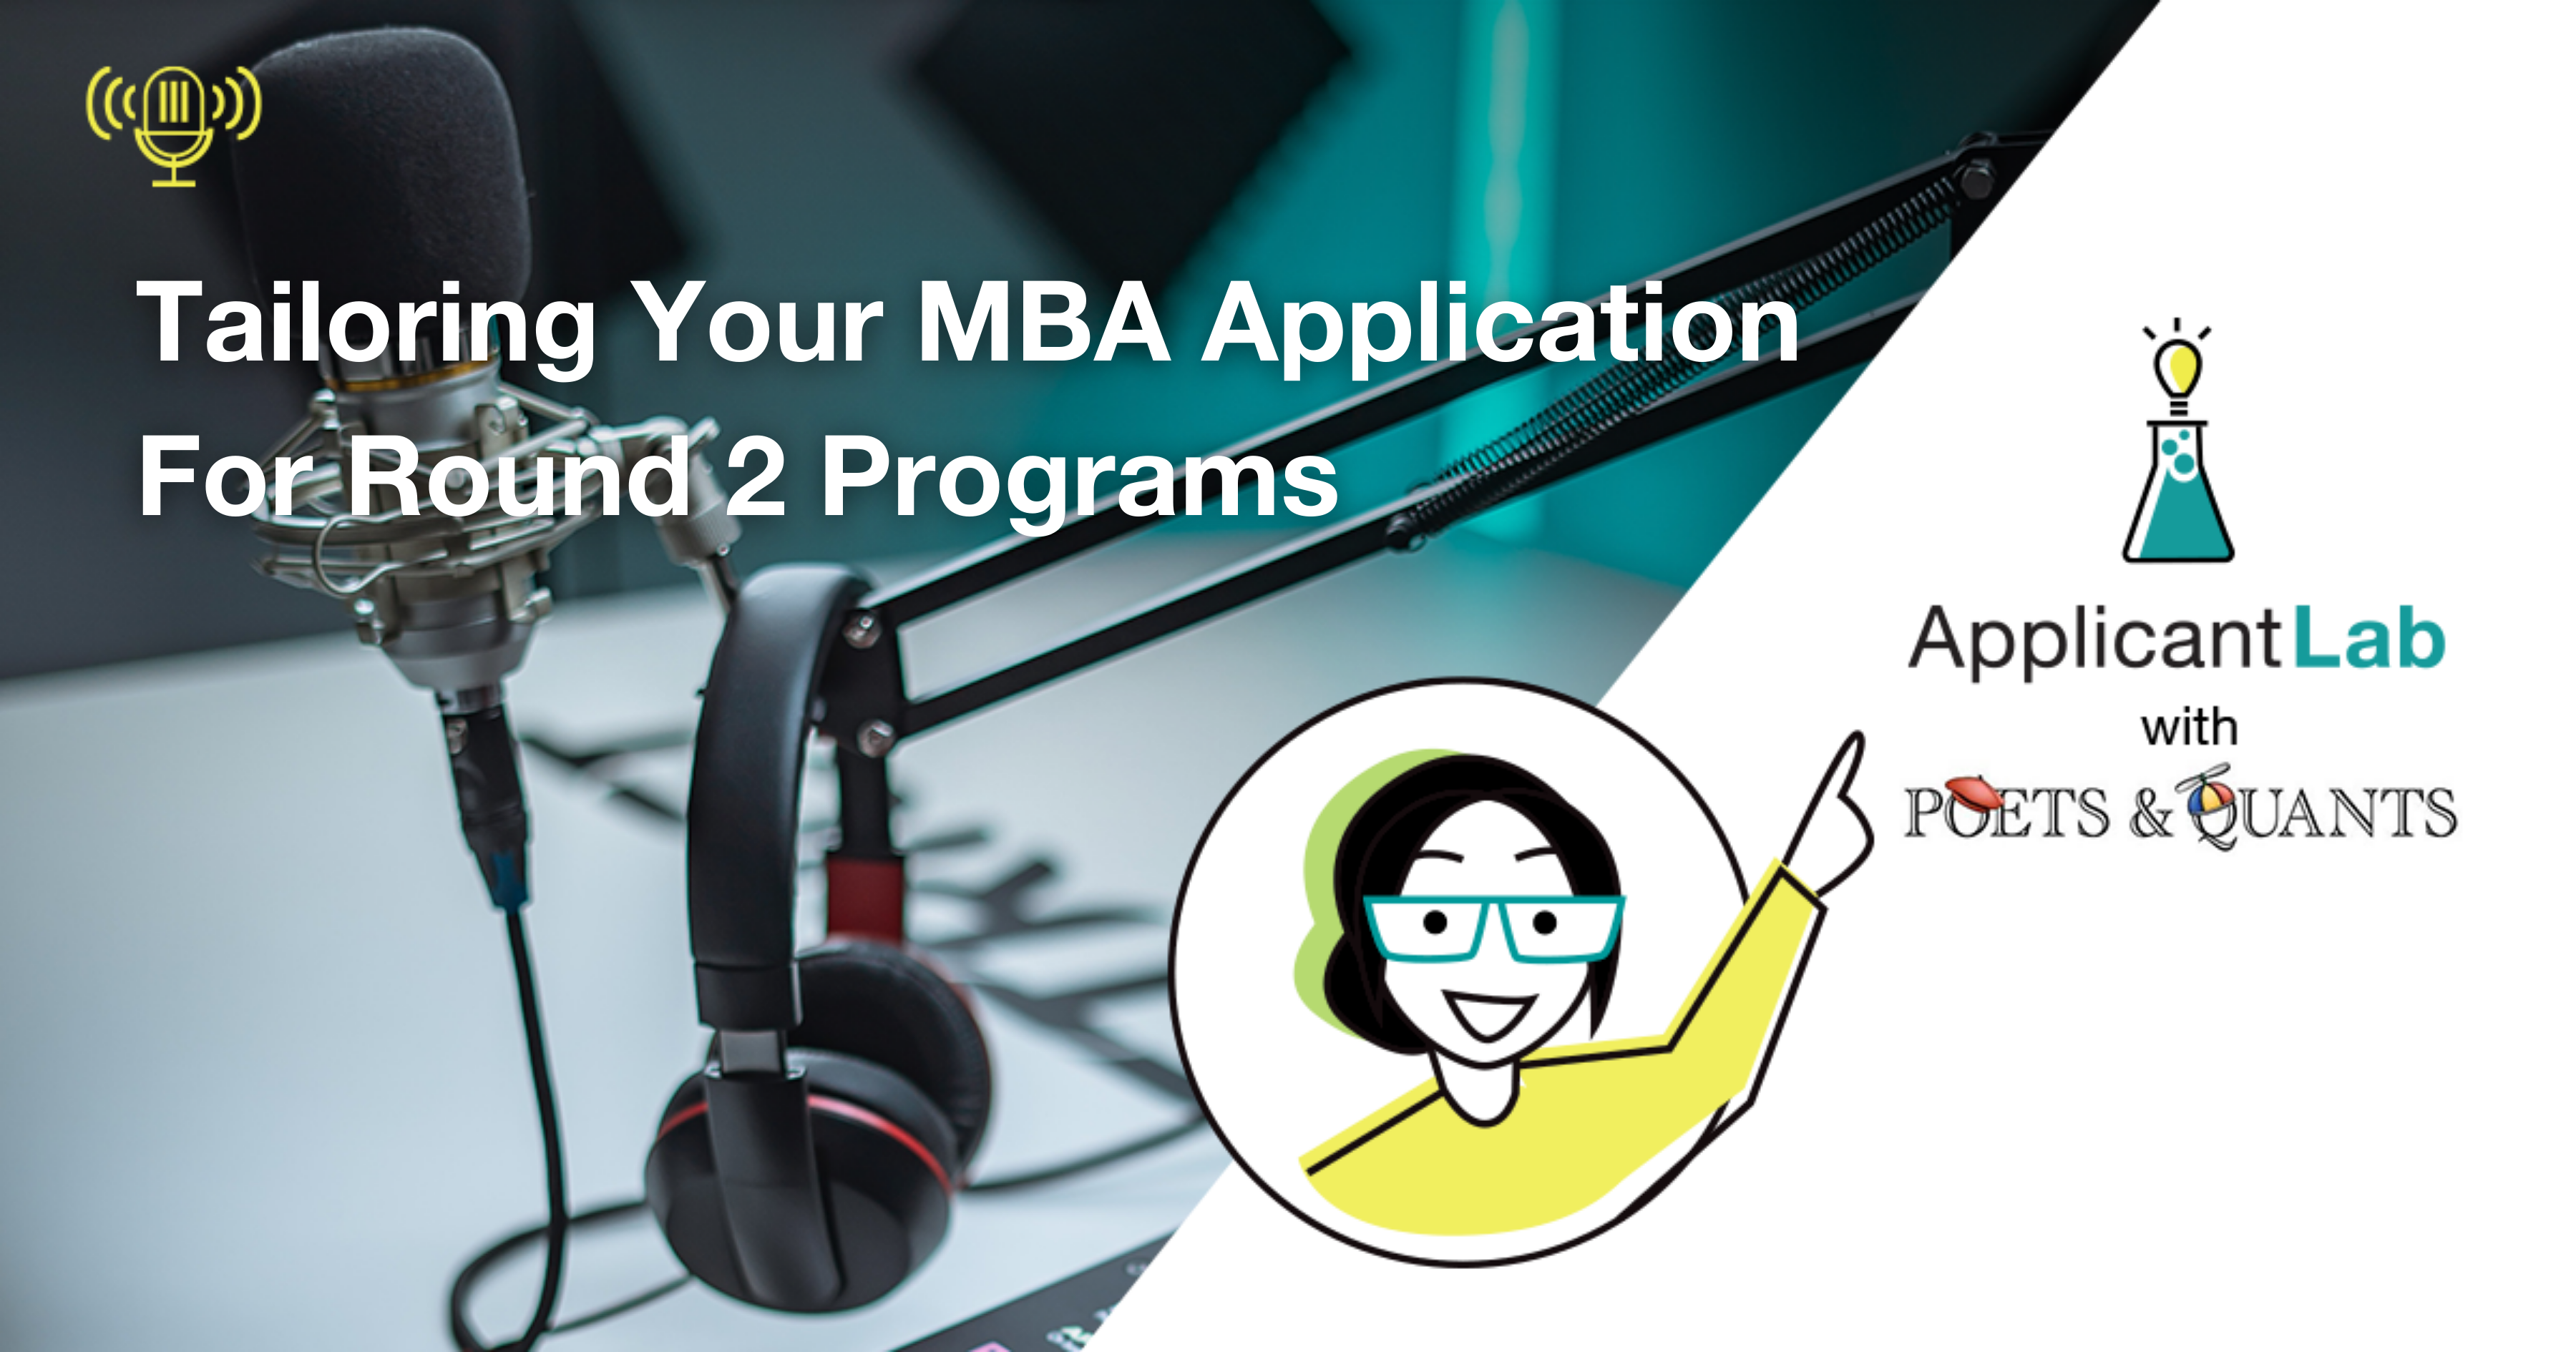 Tailoring Your MBA Application For Round 2 Programs